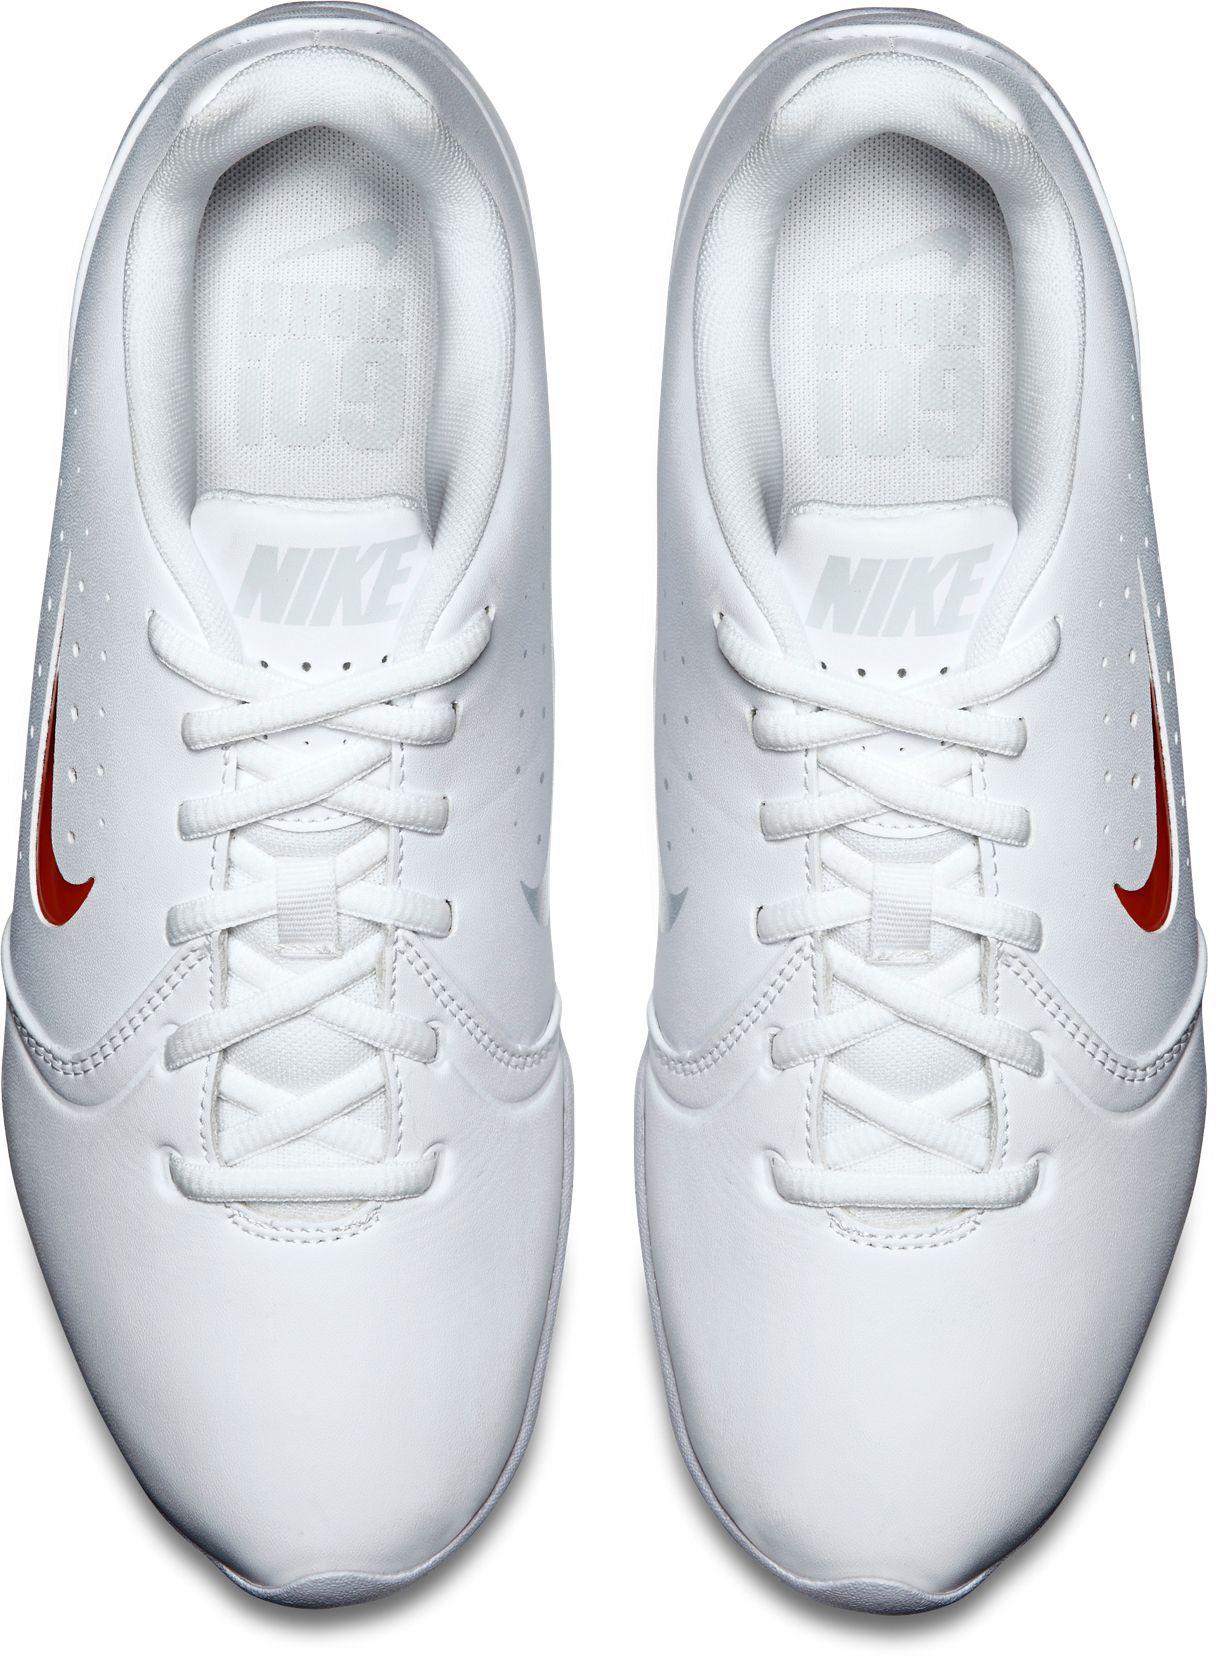 Nike Synthetic Sideline Iii Cheerleading Shoes in White/Platinum (White) |  Lyst